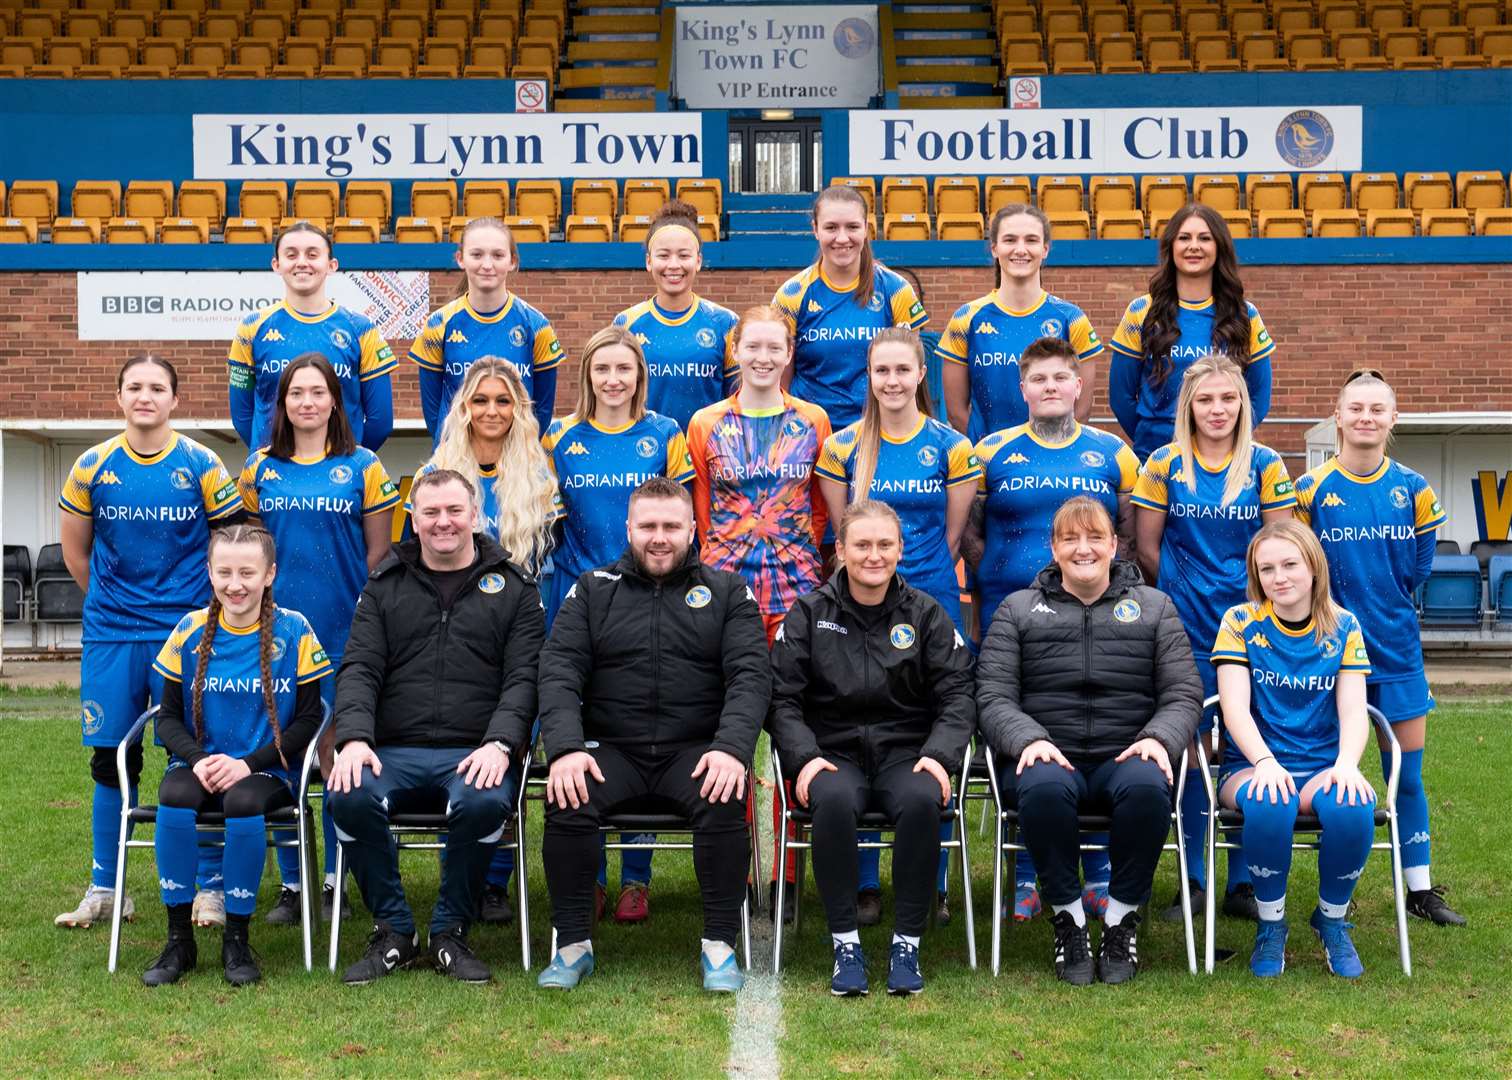 King's Lynn Town Ladies face the camera. Pictured back, from left, are: Gabrielle Cobb, Mya Parker, Geovanna Salles, Libby Scott, Katie Ward, Natalie Norman.Middle: Libby Melerski, Charlotte Croft, Shannon Simper, Kamarla Lawson, Erica Meale, Jade Parnell, Georgie Archer, Chelsea Simper, Holly Williams.Front: Jessica Napper, Doug Parker (coach), Alec Marshall (manager), April Kitchen (assistant manager), Marie Meale (coach), Kayla Rix. Picture: Tim Smith